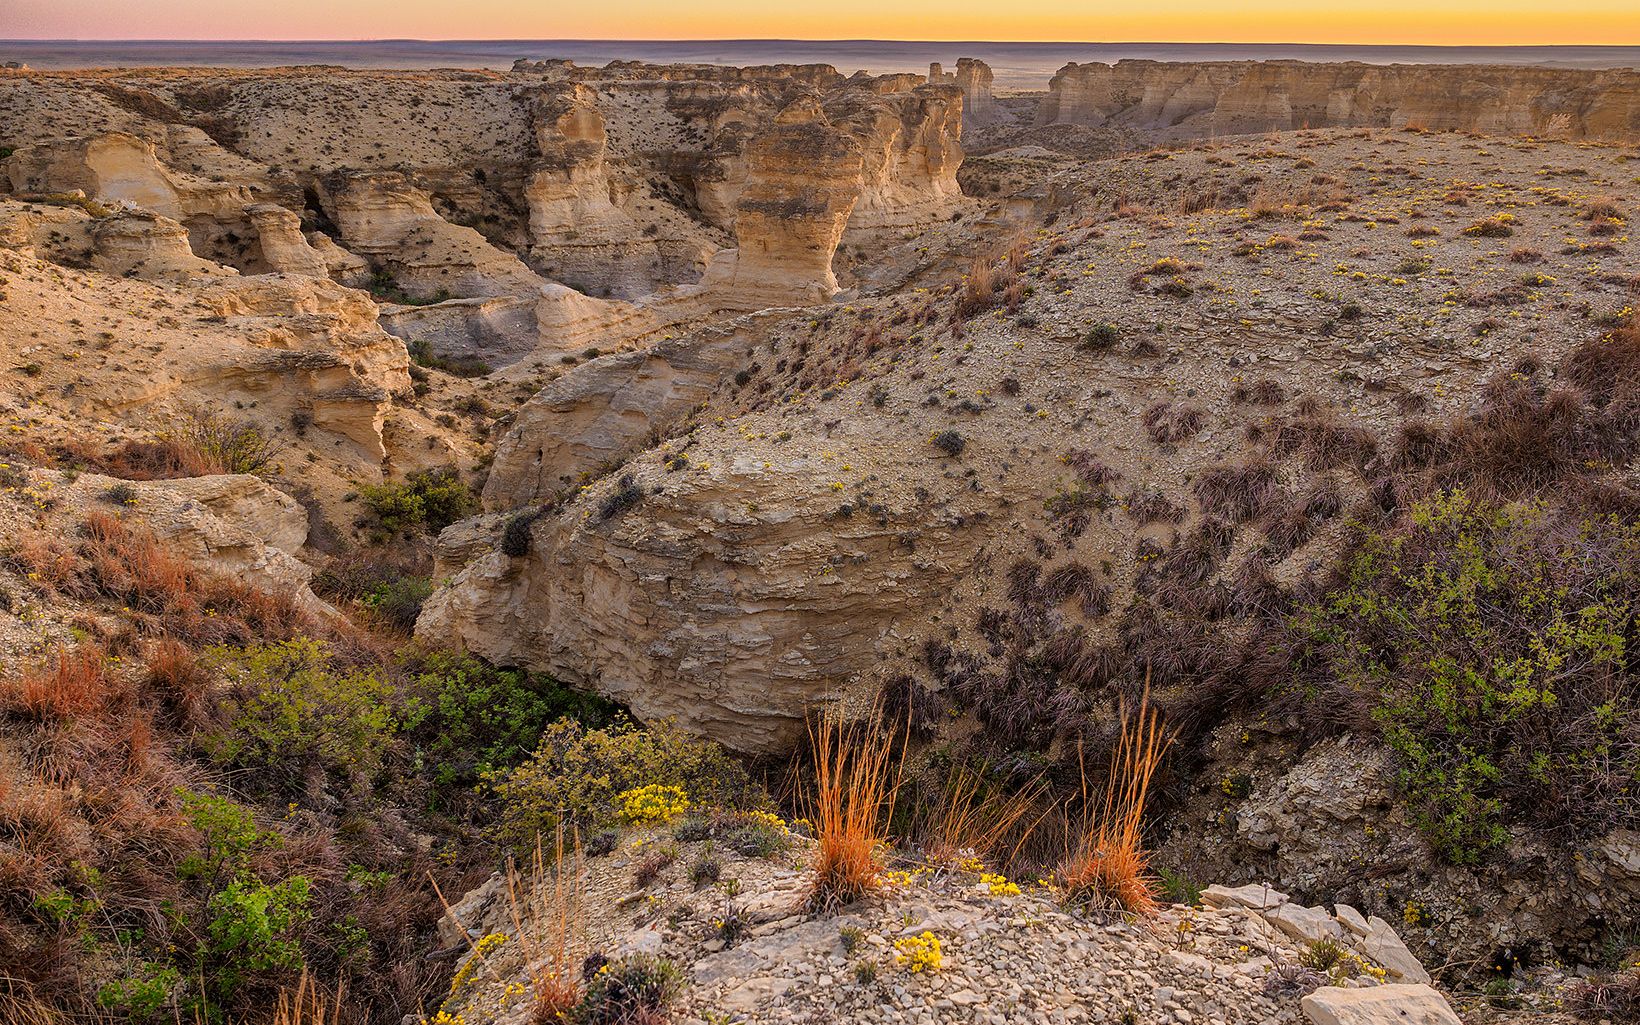 
                
                  Niobrara Chalk Formations The iconic Noibrara chalk formations in Little Jerusalem Badlands State Park were formed 85 million years ago, when the area was covered by the Western Interior Seaway.
                  © Bruce Hogle
                
              